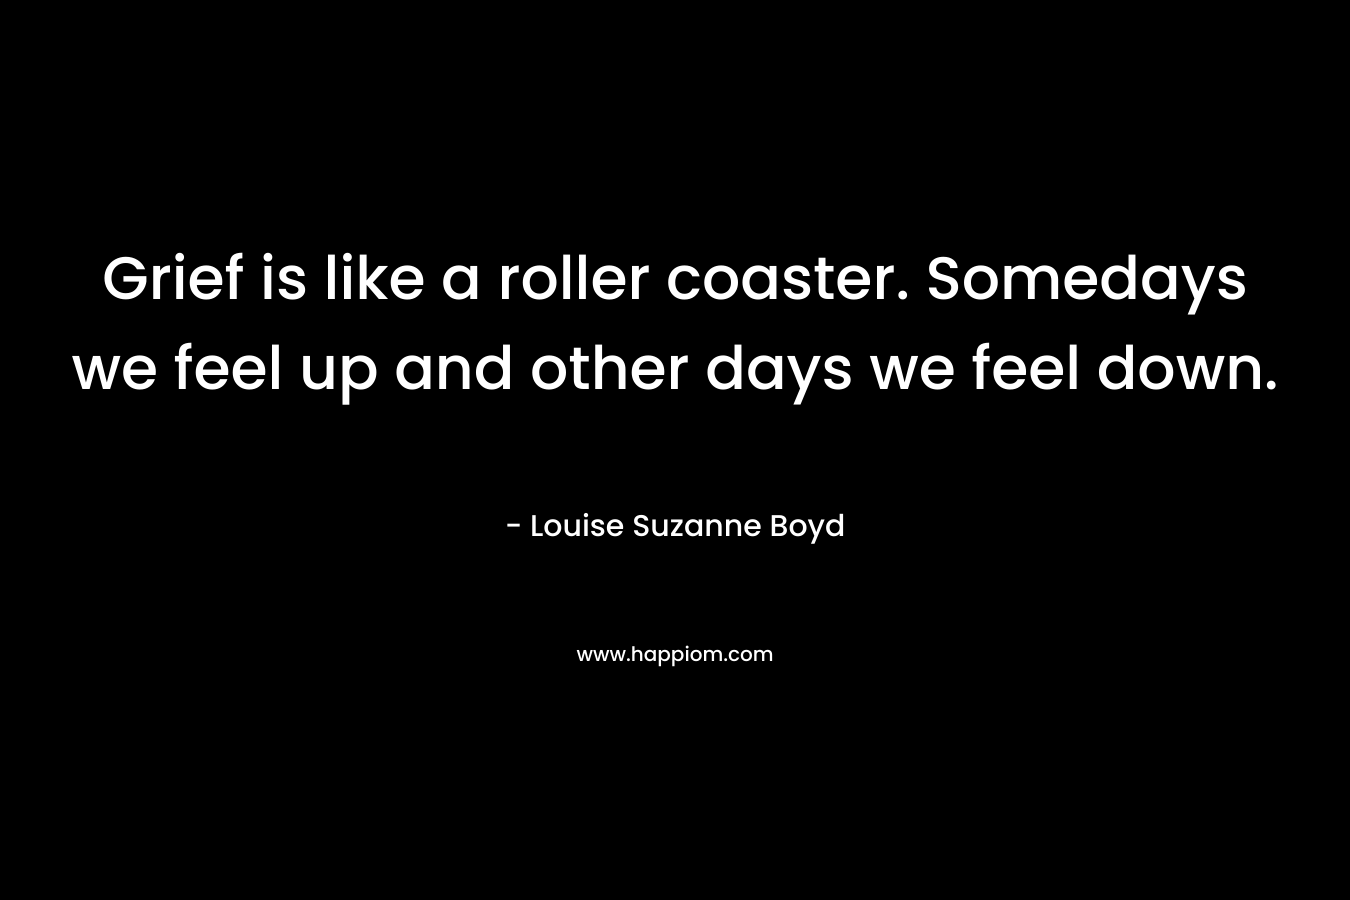 Grief is like a roller coaster. Somedays we feel up and other days we feel down. – Louise Suzanne Boyd